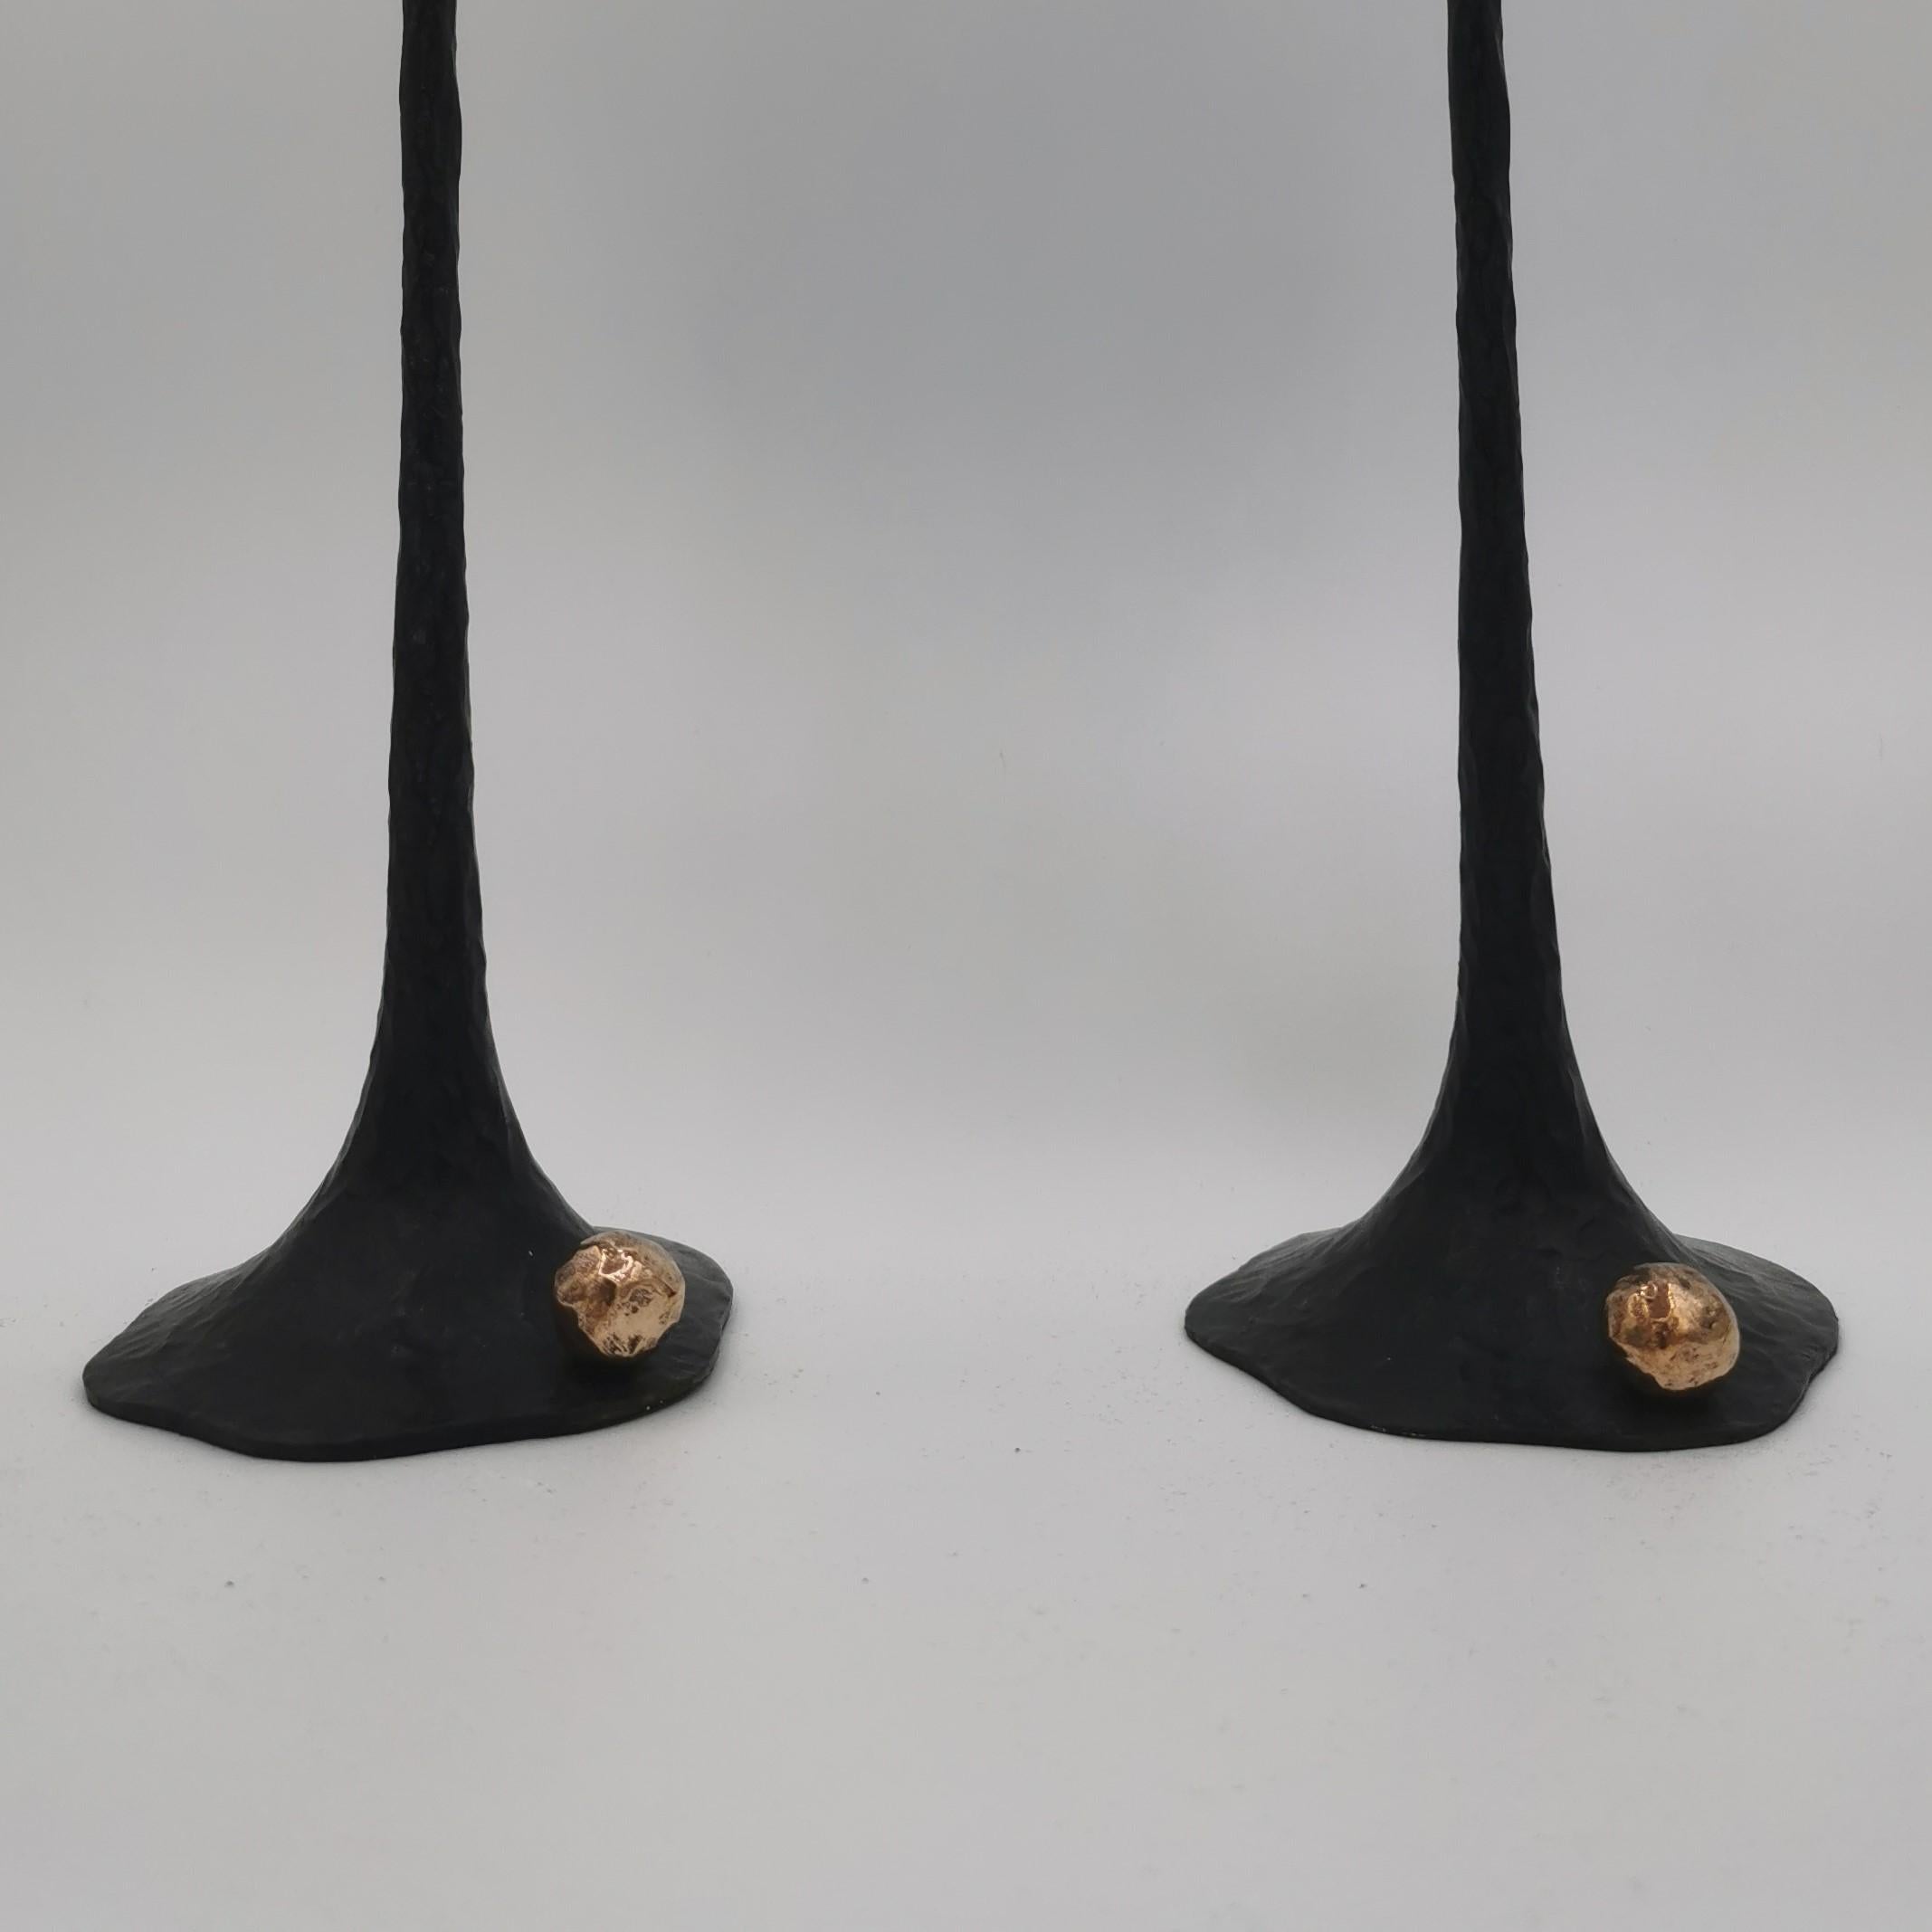 Other Set of 2 Primus Small Decorative Objects by Emanuele Colombi For Sale